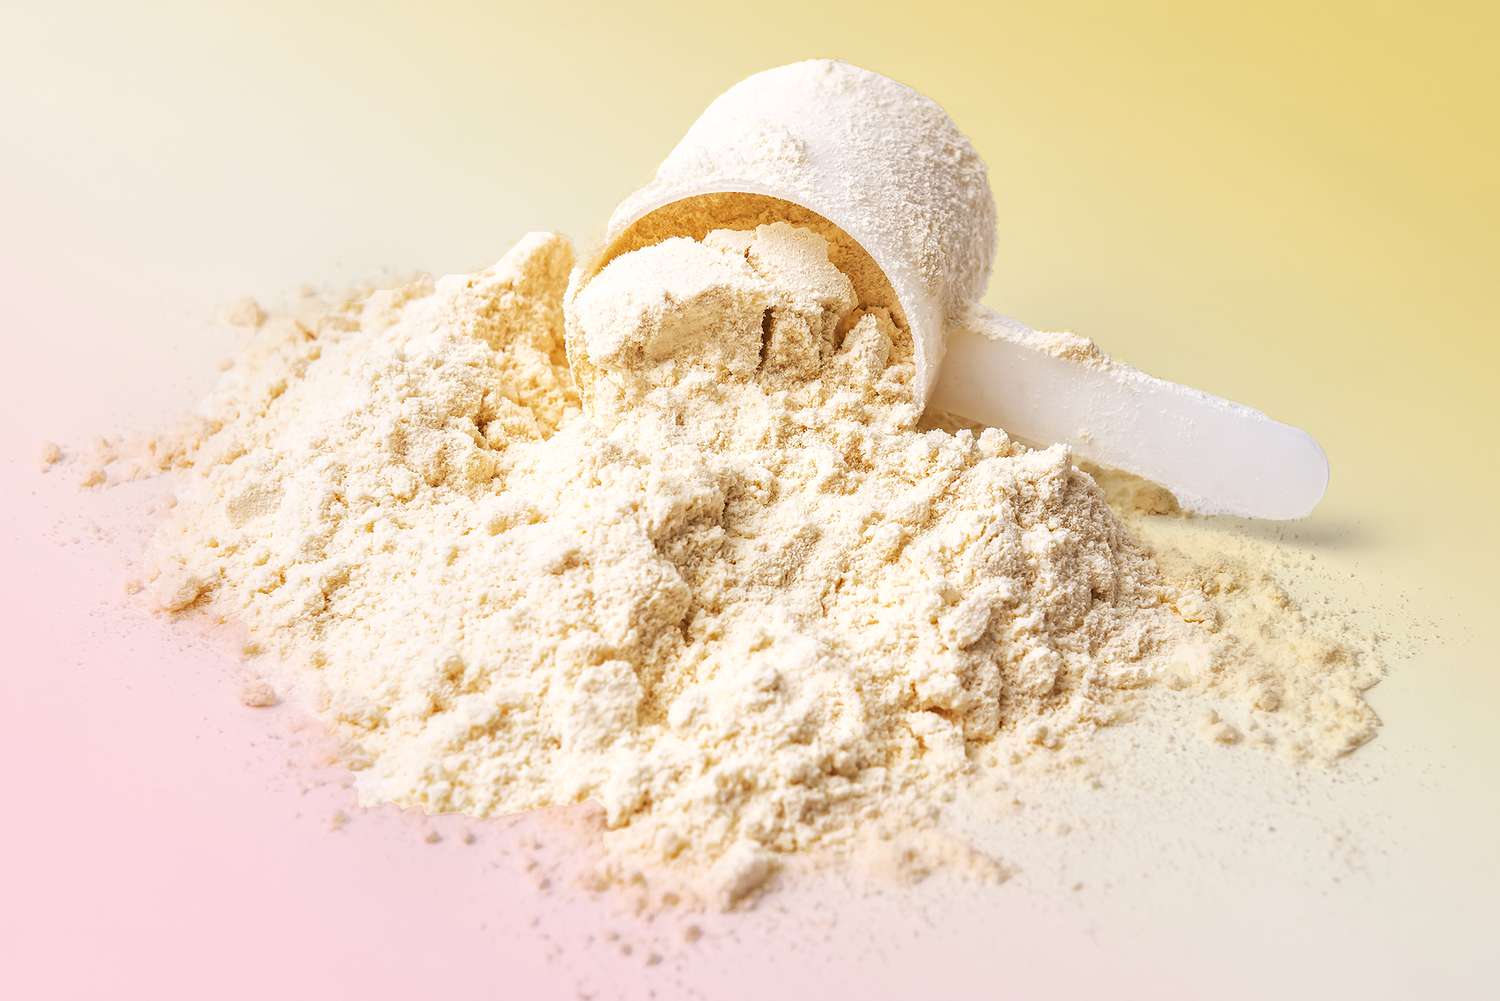 heap of protein powder on a designed background